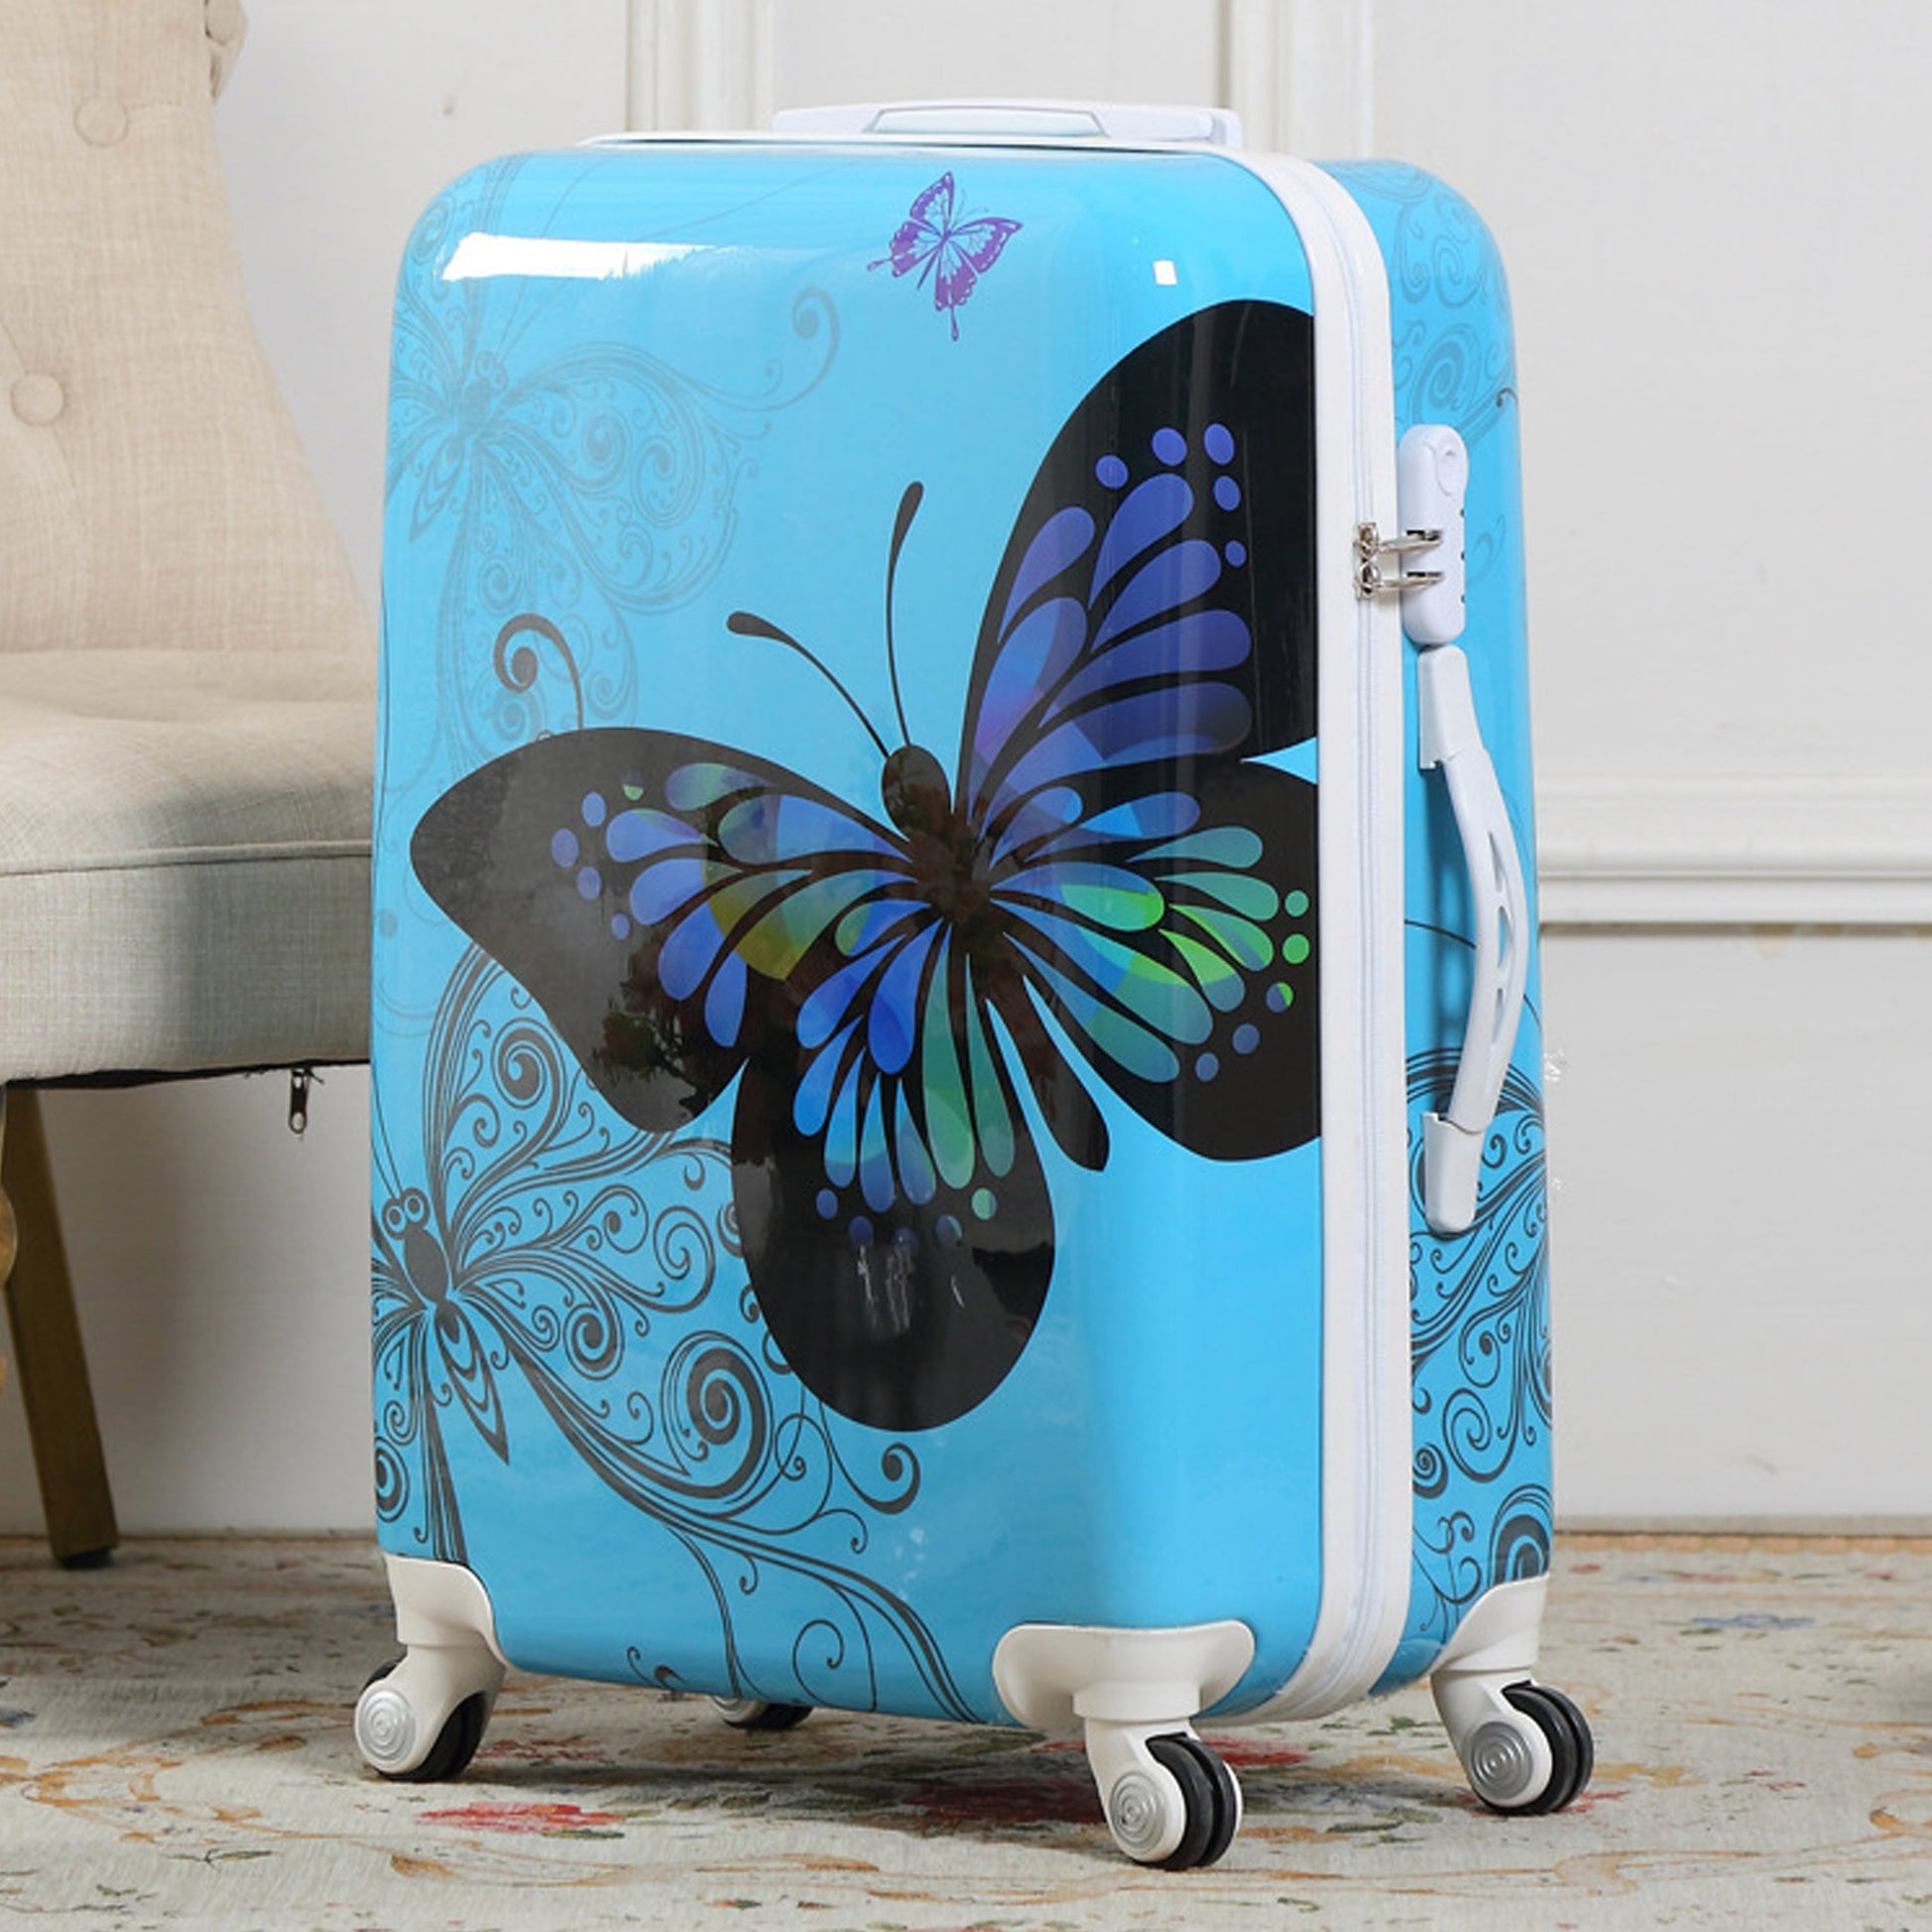 Flash Sale Offers | Printed Lightweight ABS 4 Wheels Luggage Bag | 7-10 Kg, 20-25, Kg 30-35 Kg Cabin Size and Big Sizes Zaappy